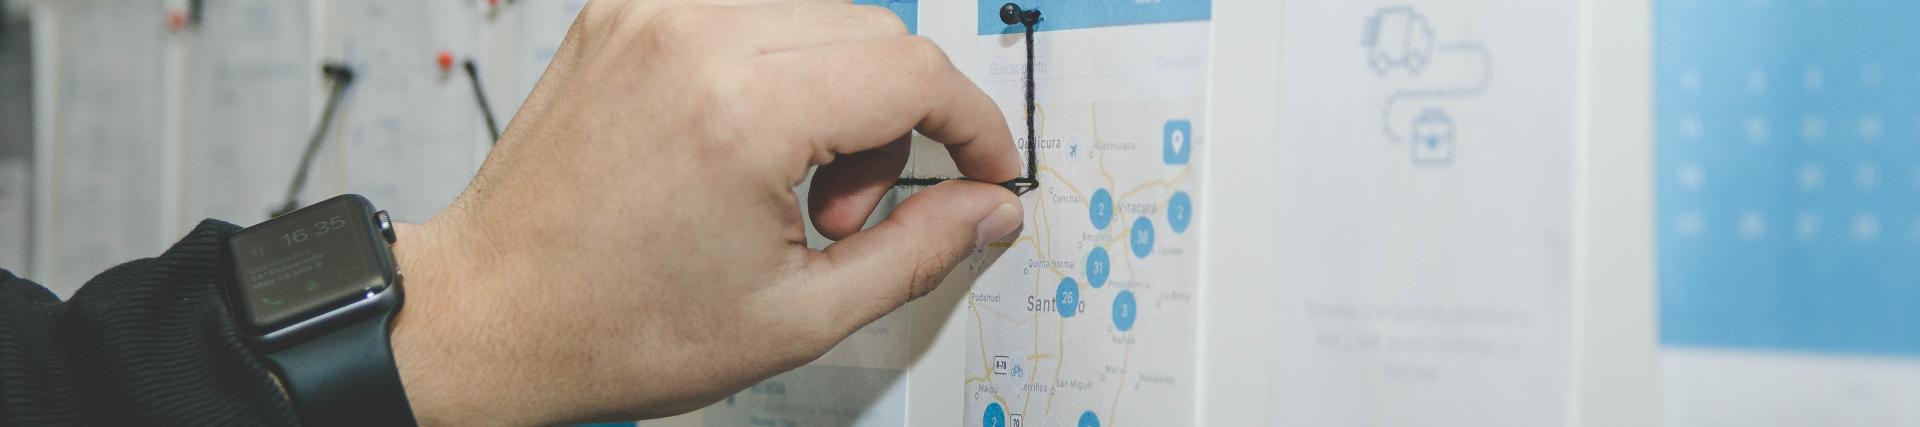 Hand placing a pin on a chart